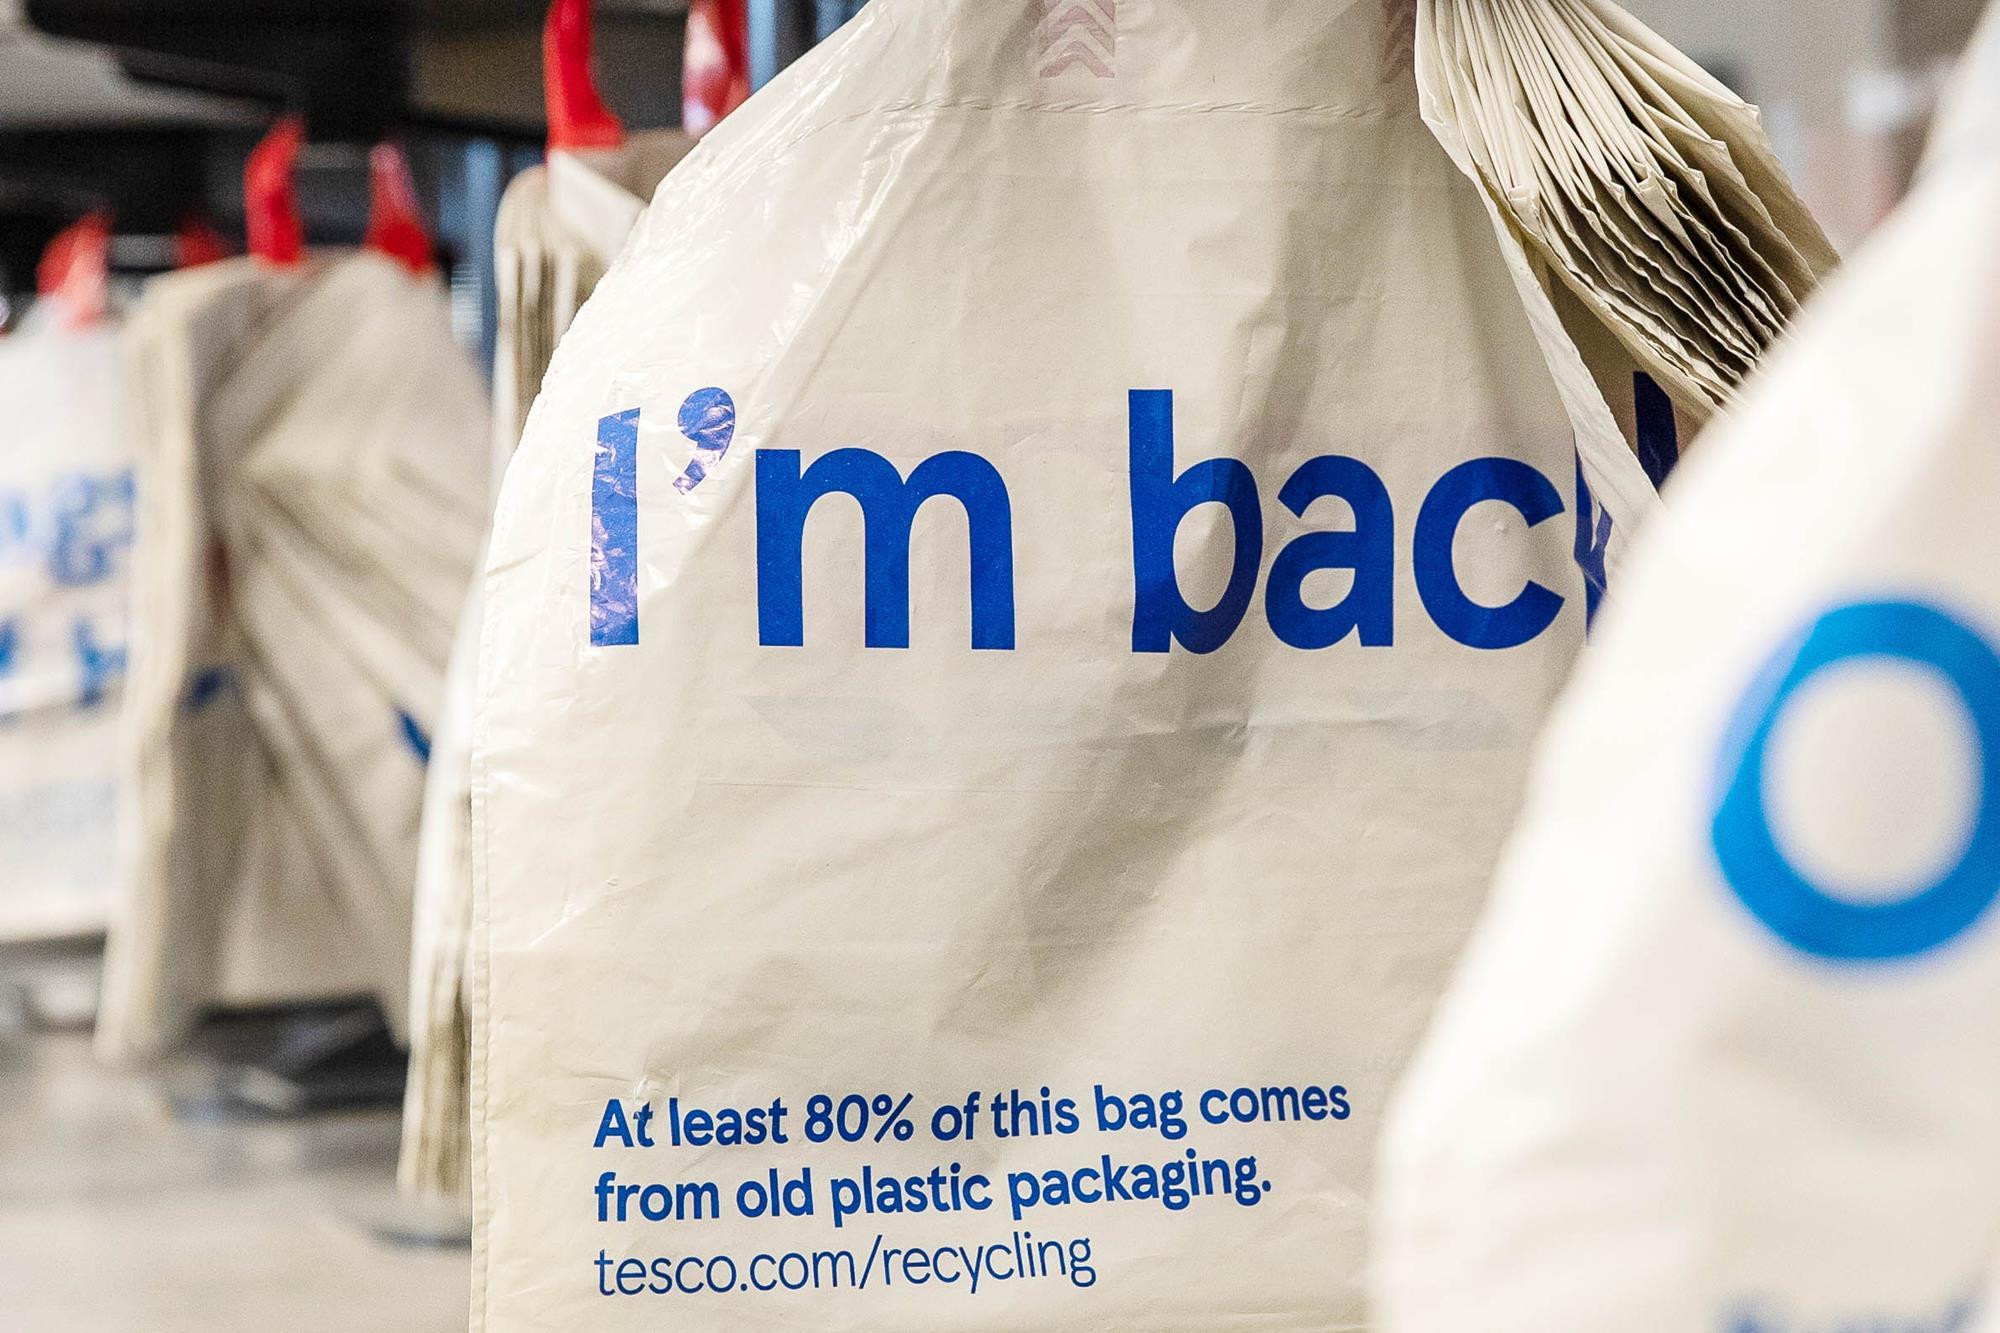 Tesco bins 5p plastic carrier bags forever - now you'll have to get a bag  for life